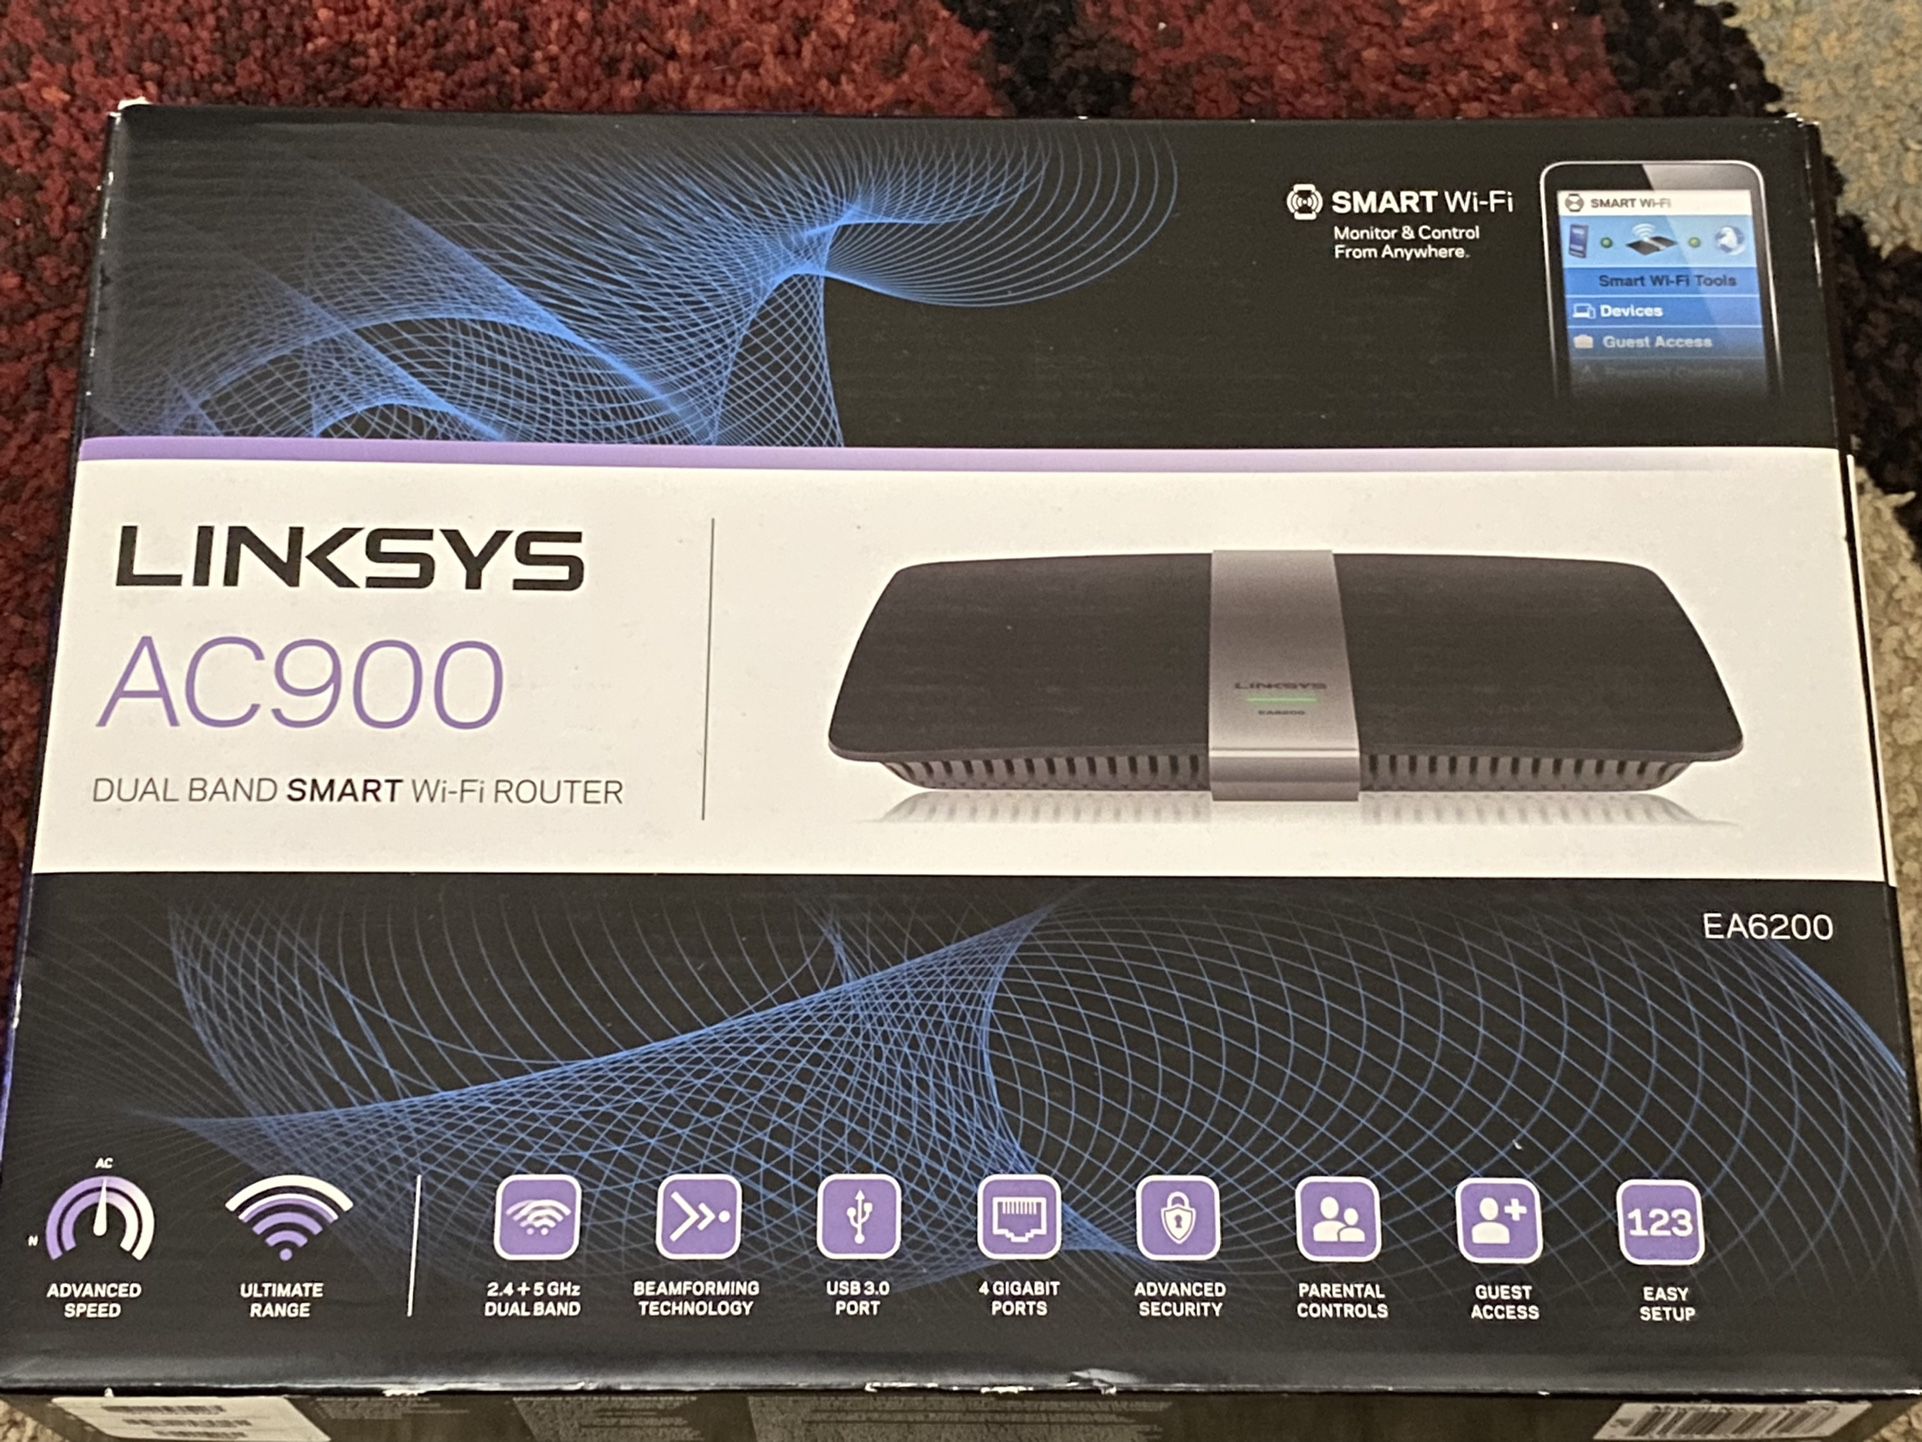 Linksys AC900 Wi-Fi Router